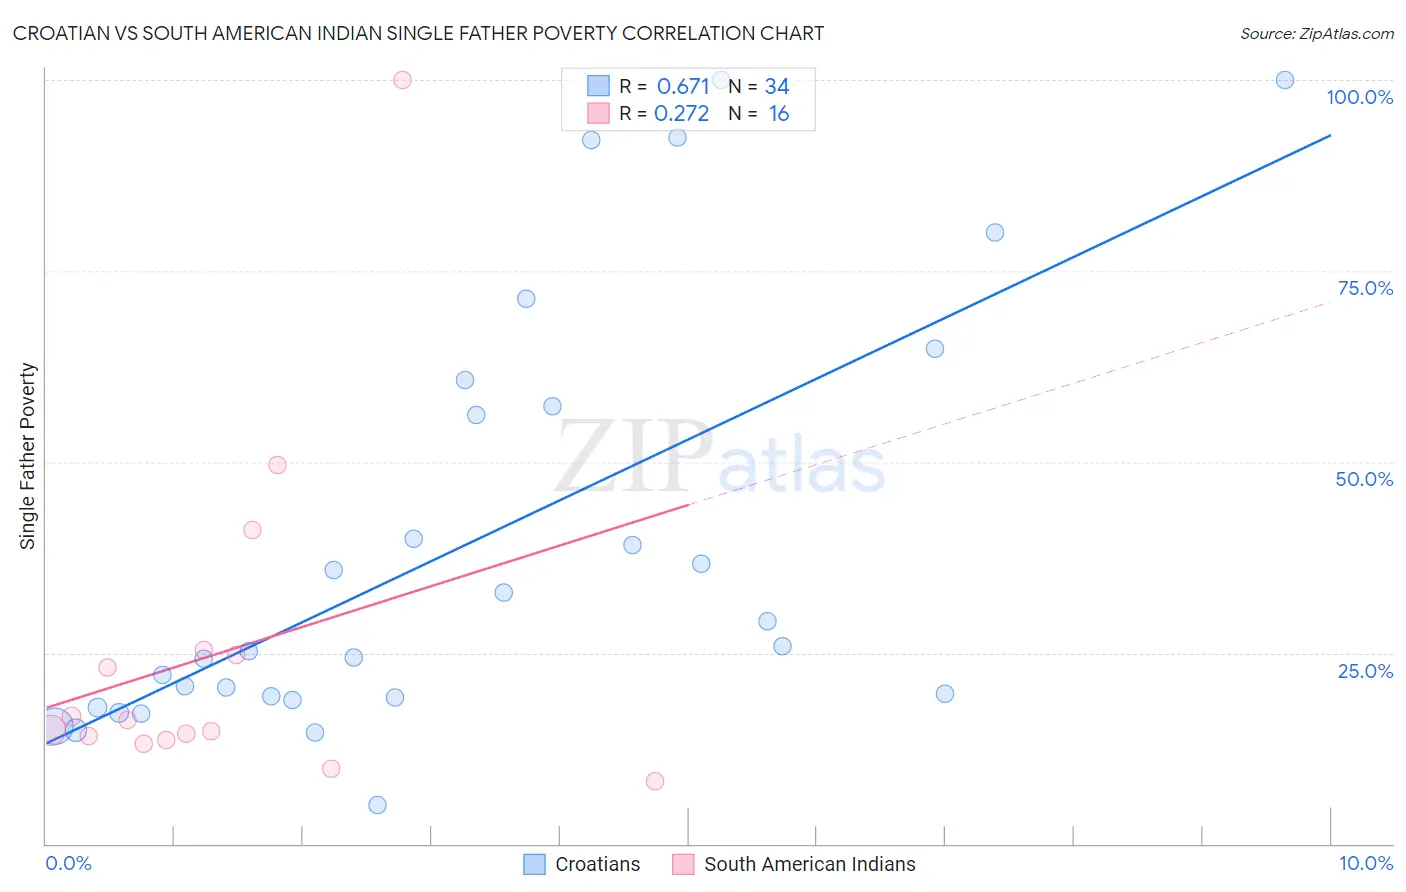 Croatian vs South American Indian Single Father Poverty